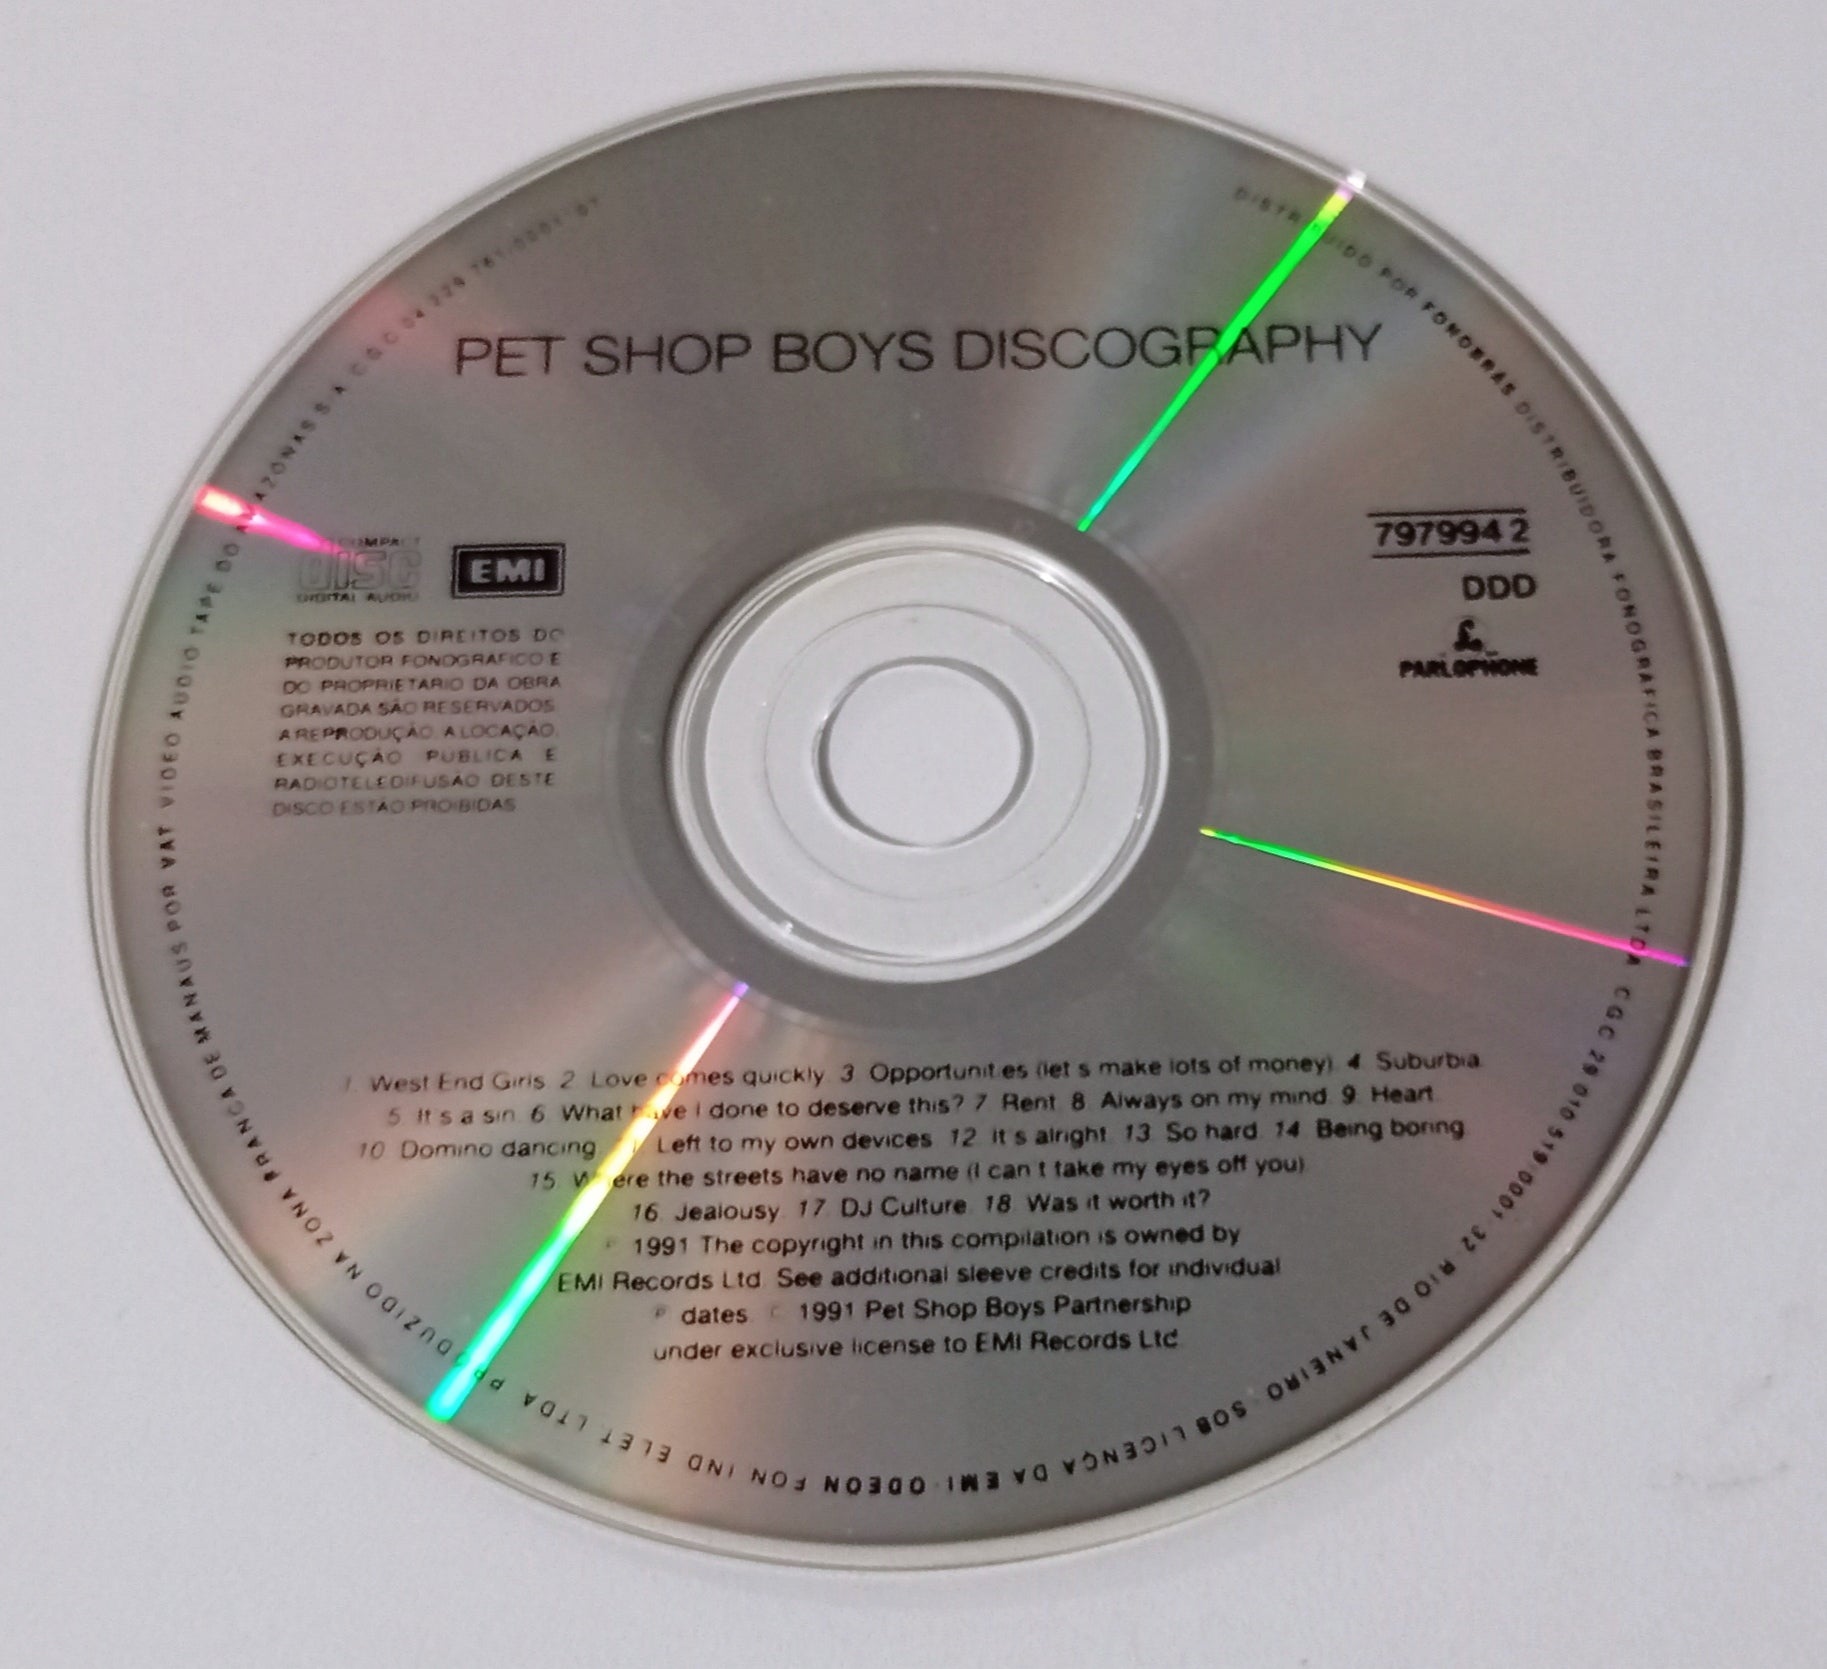 Pet Shop Boys - Discography (The Complete Singles Collection) (CD Naci –  Jam Session Discos